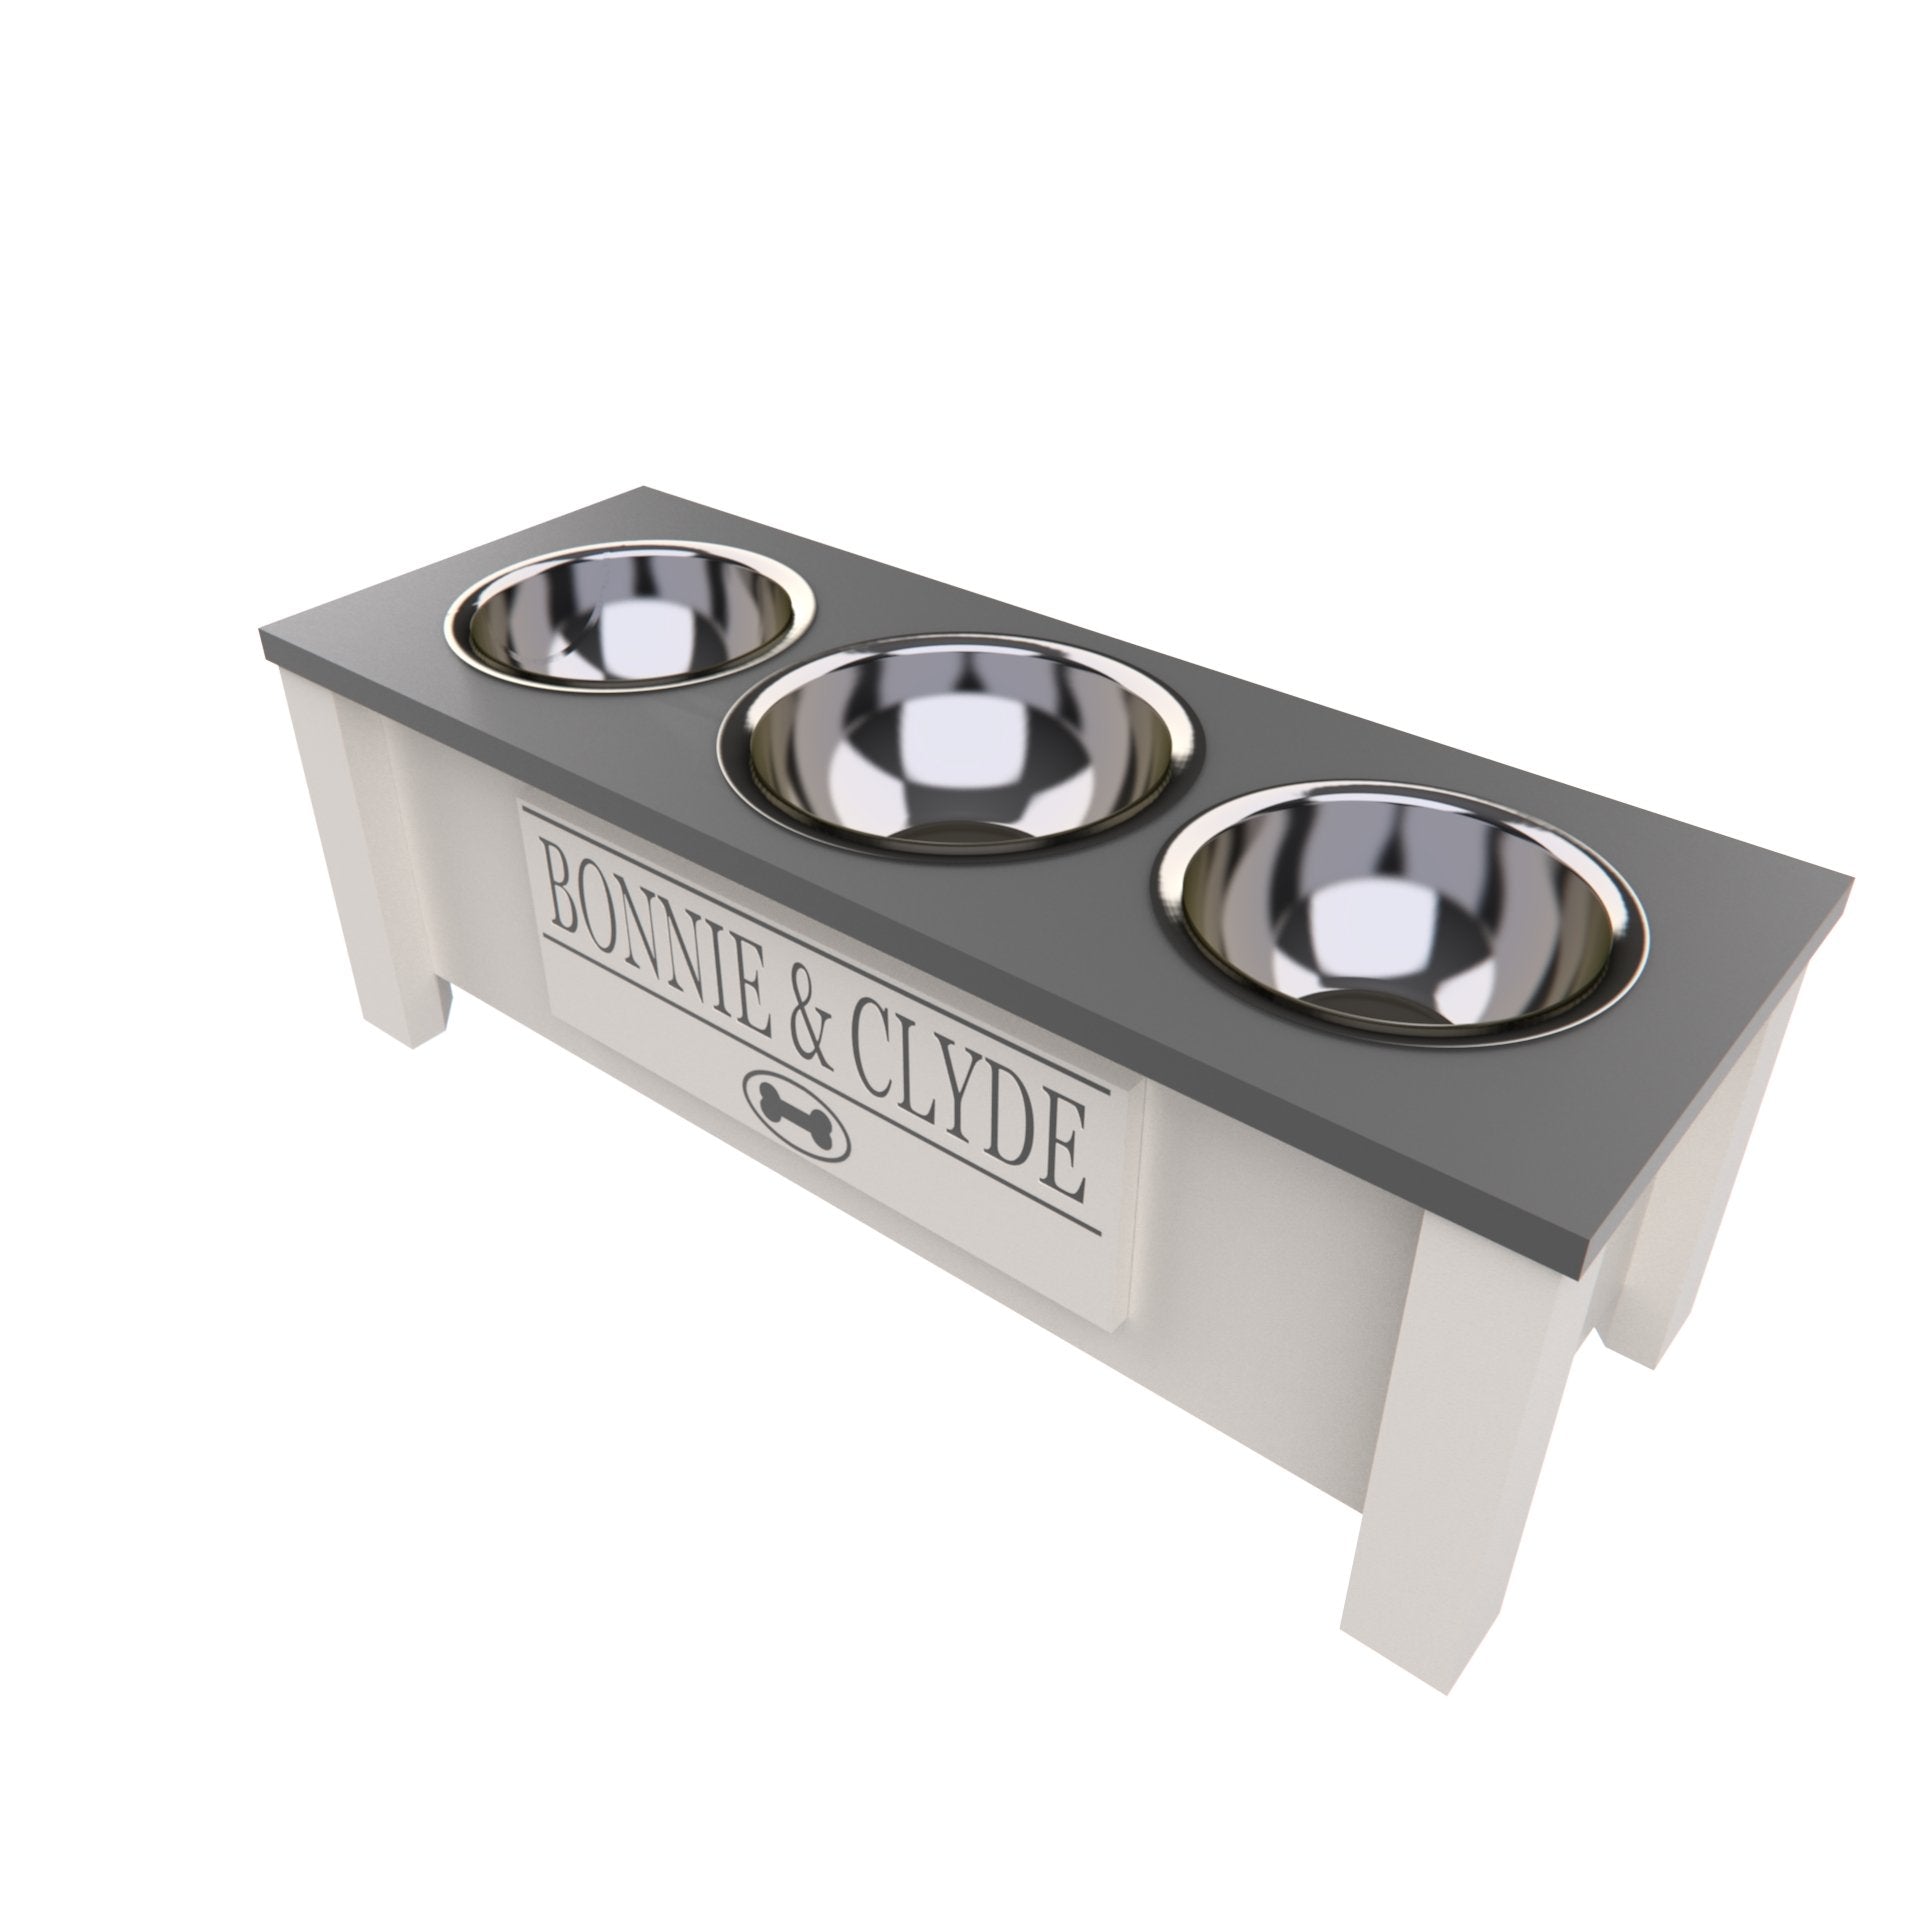 3 bowl elevated dog feeder with storage drawer (WH-FL) – The LoveMade Home